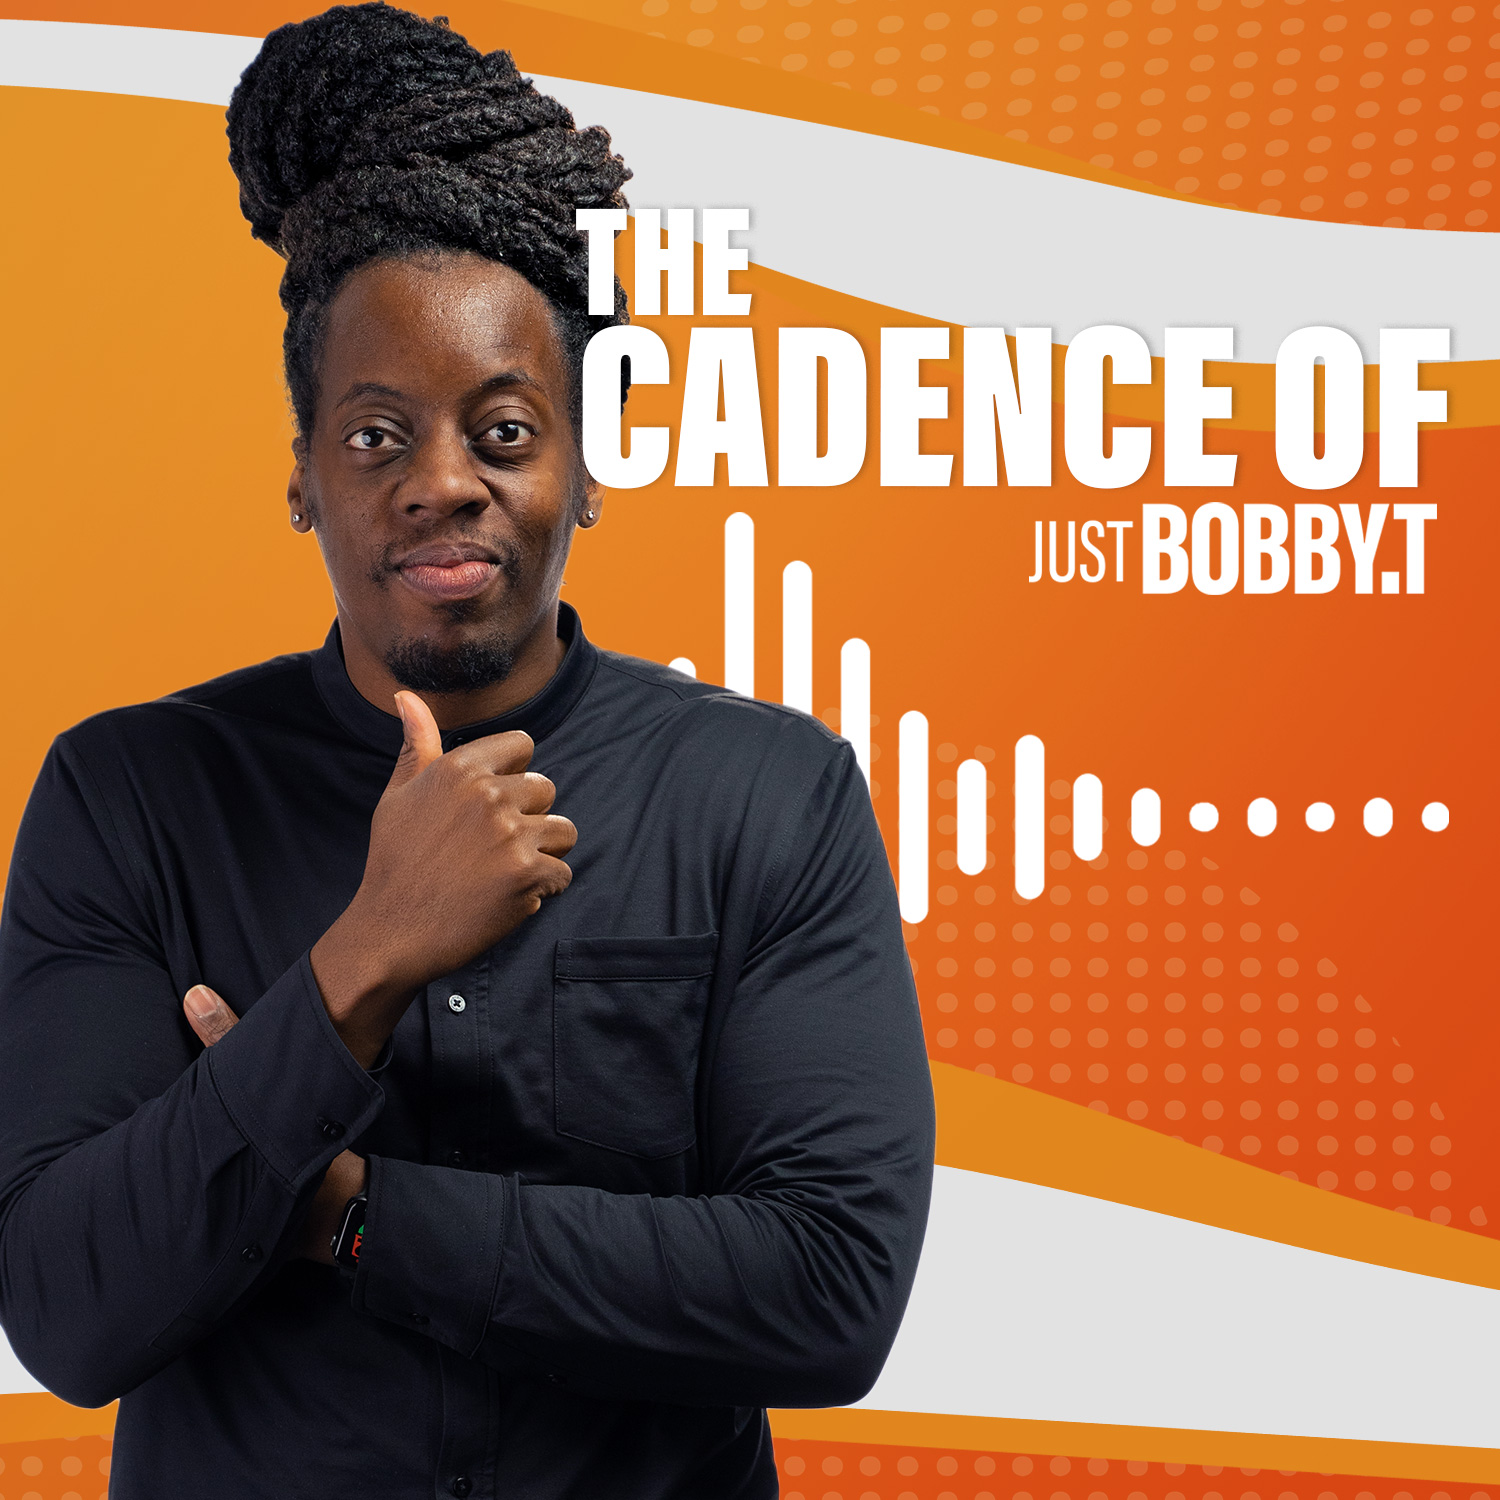 Cover image for 'The Cadence of Just Bobby.t' podcast episode, featuring a beaming Bobby.t and a visual representation of an audio waveform."